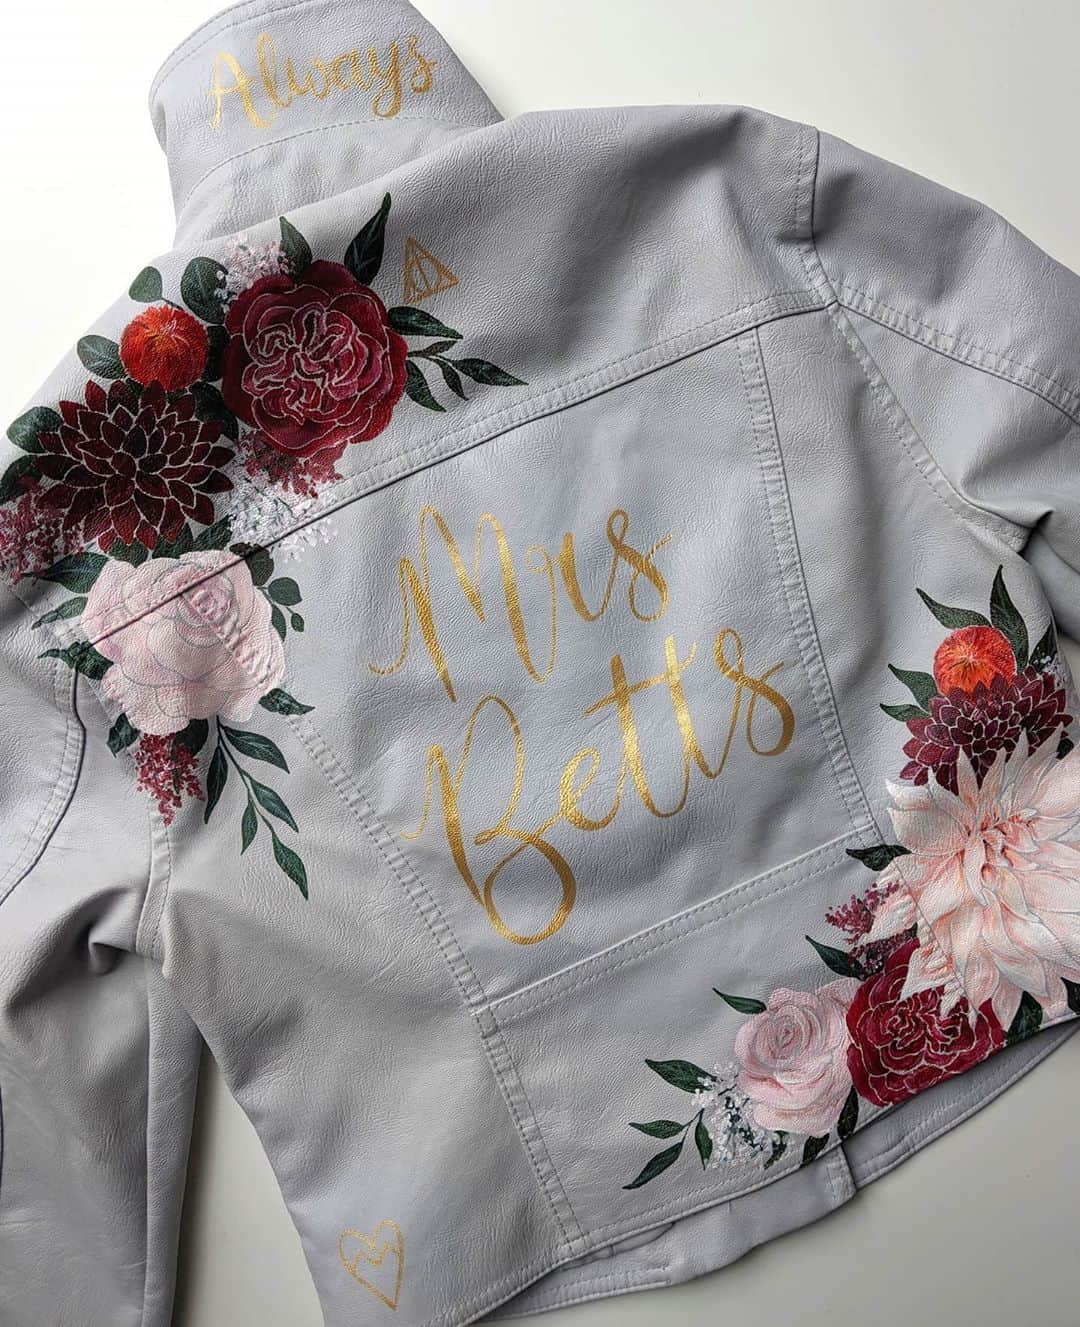 Designer Creates Gorgeous Hand-Painted Jackets for Your Special Occasions